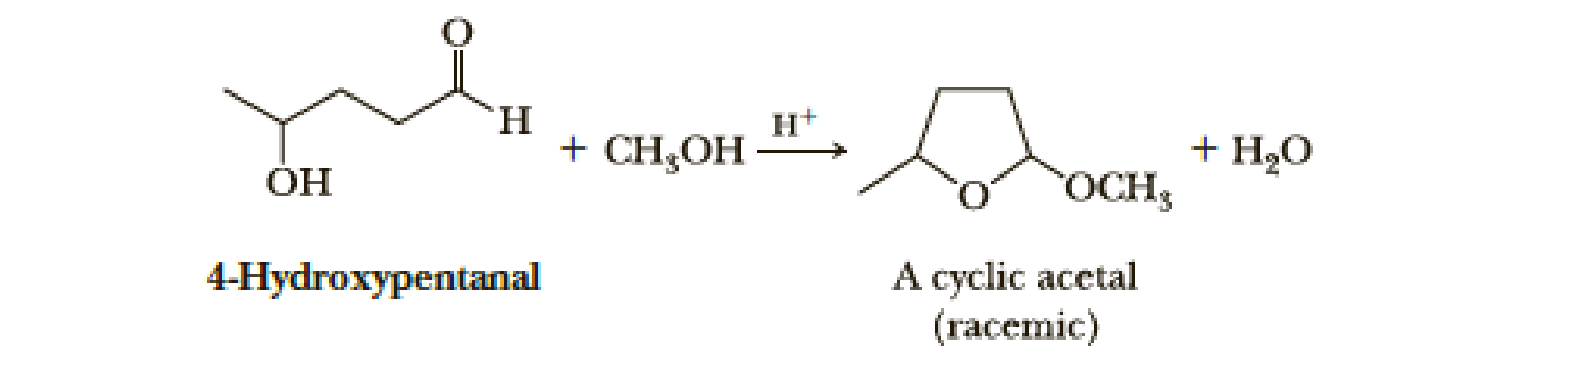 Chapter 16, Problem 16.32P, Propose a mechanism to account for the formation of a cyclic acetal from 4-hydroxypentanal and one 